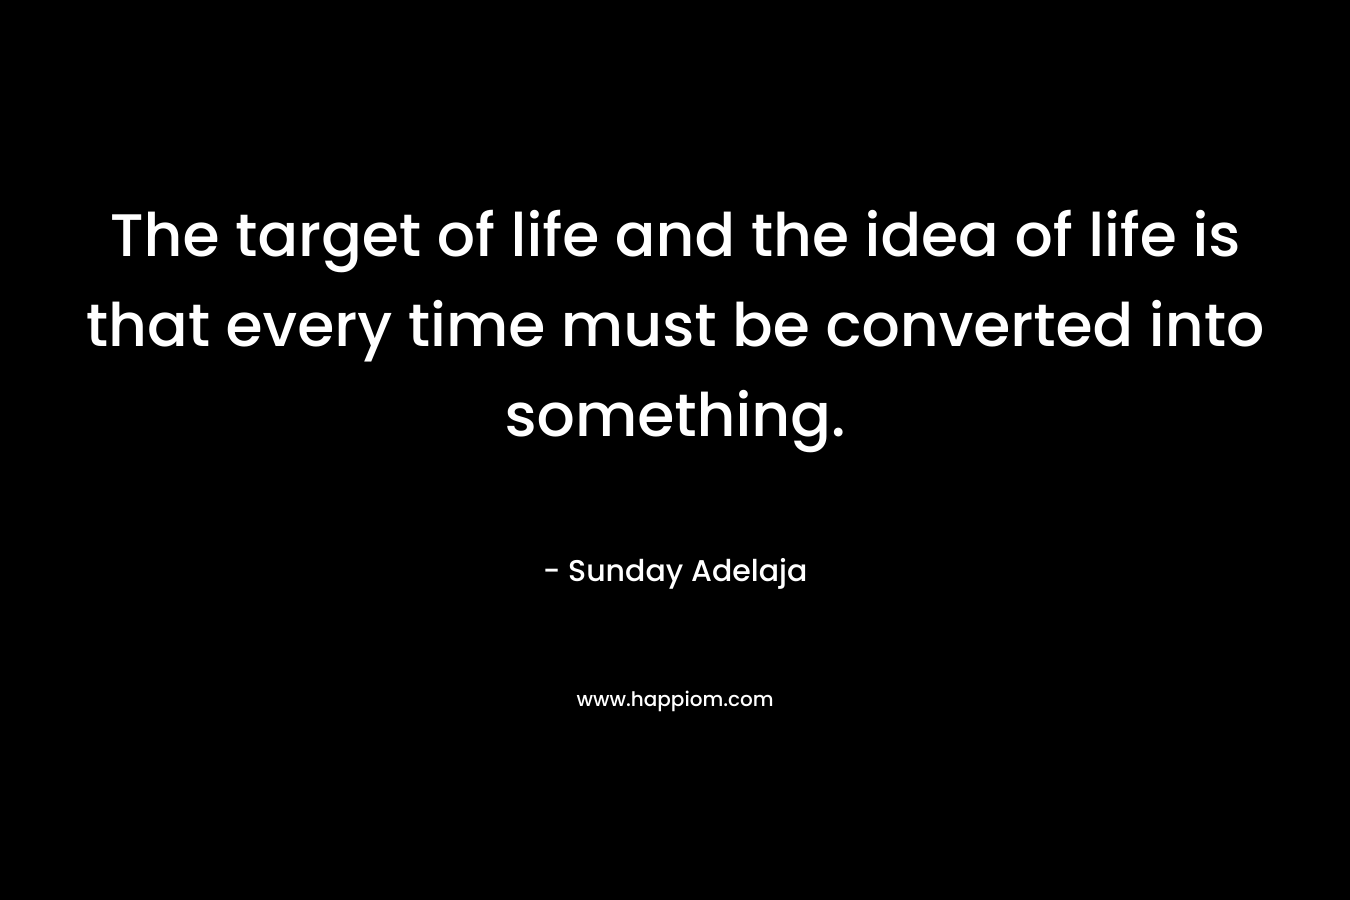 The target of life and the idea of life is that every time must be converted into something.